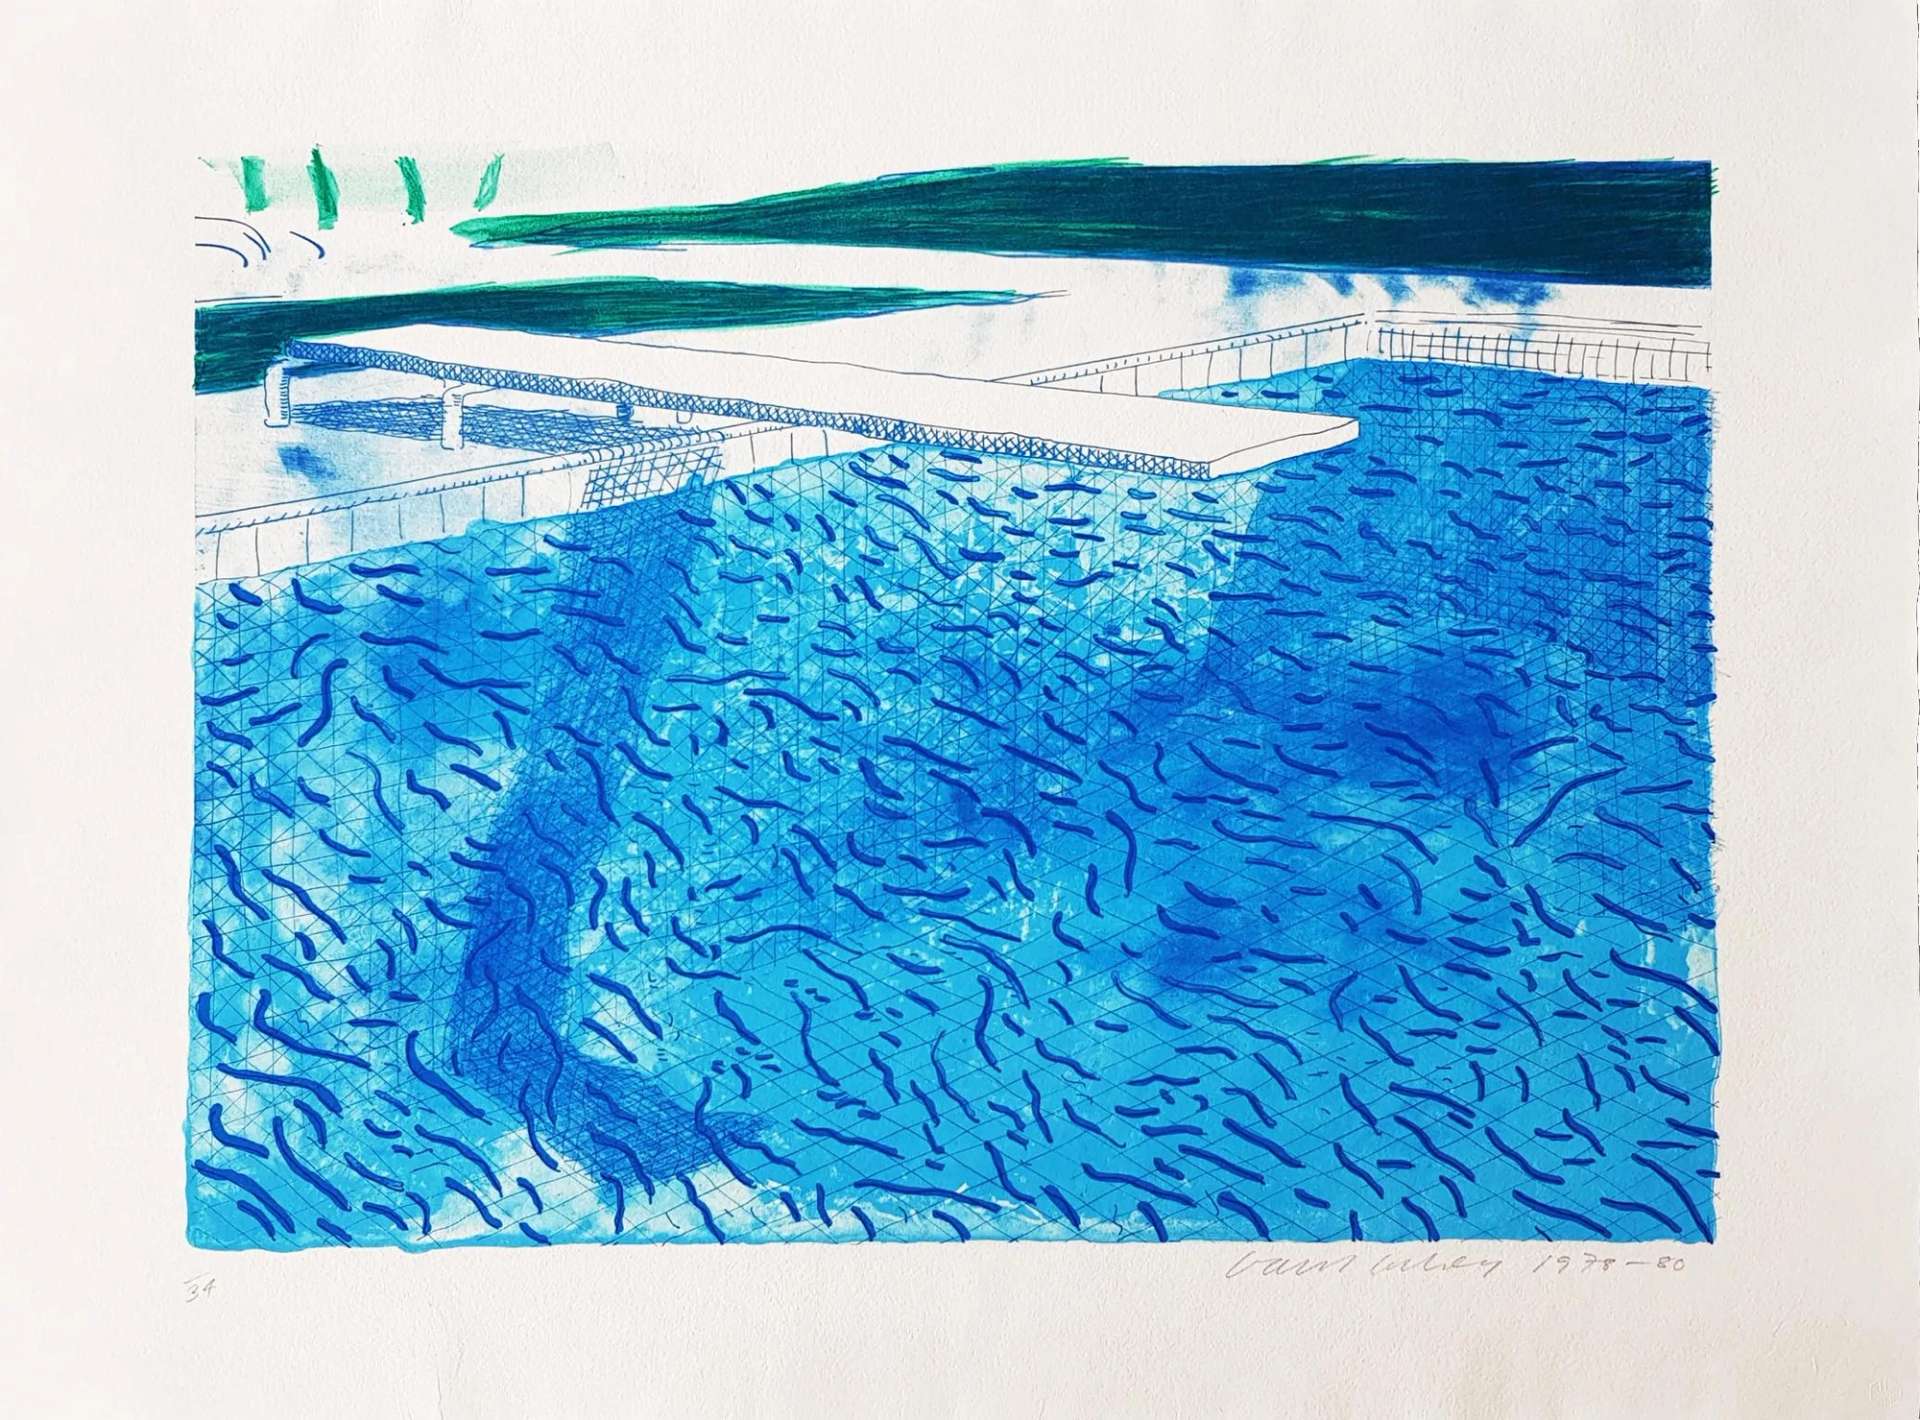 A lithography by David Hockney depicting a swimming pool.